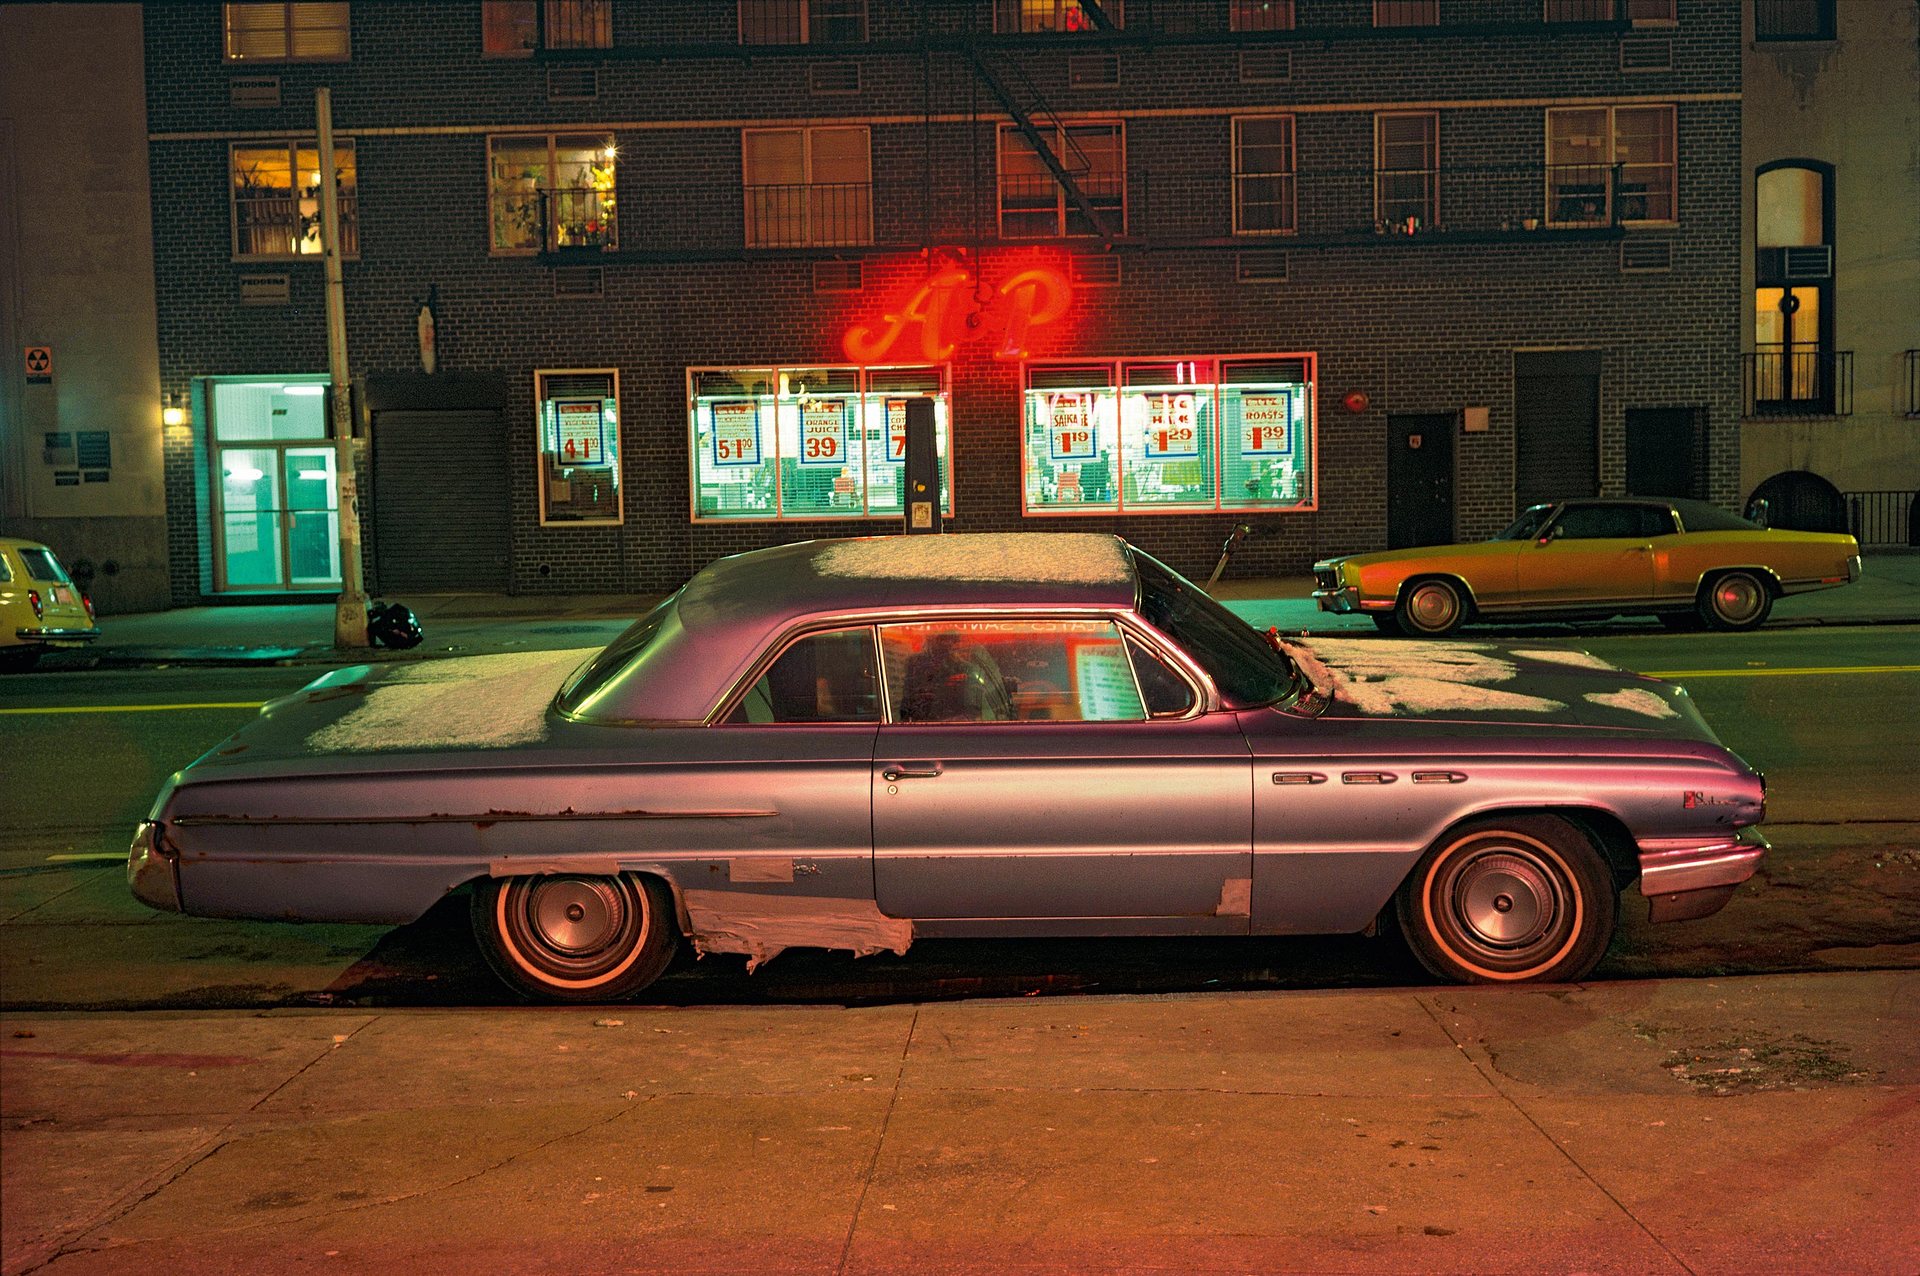 A&P car, Buick LeSabre, 14th Street between 7th and 8th Avenues, 1974.jpg